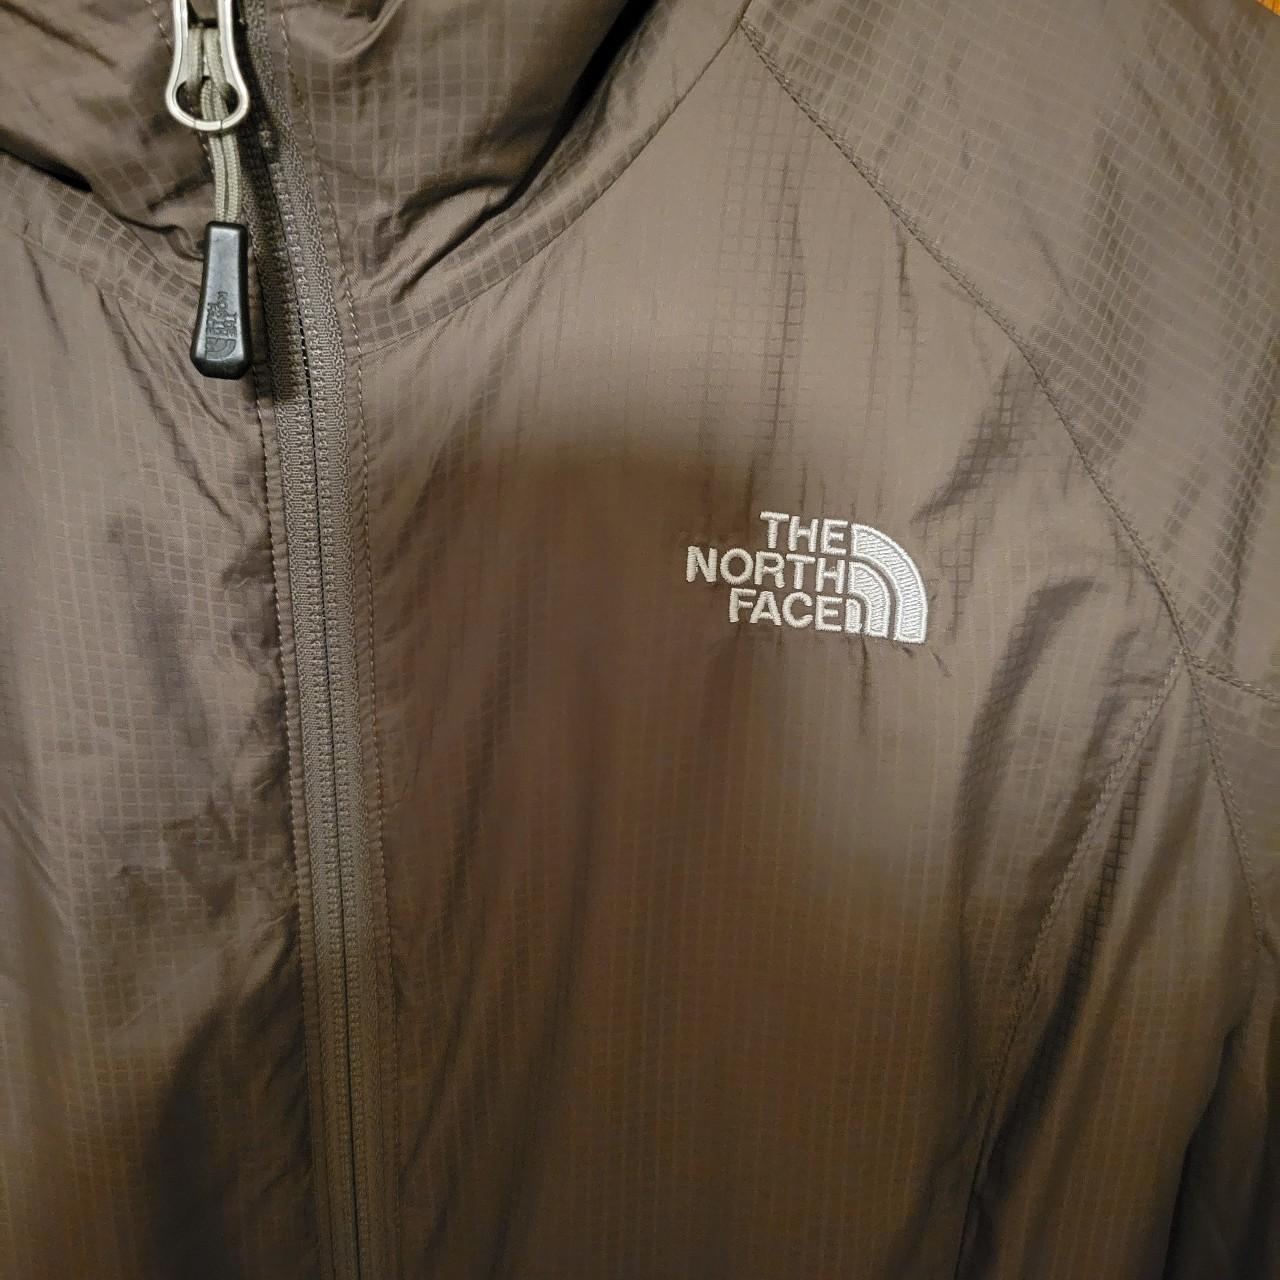 North Face Jacket Size Med. Has fleece interior and... - Depop